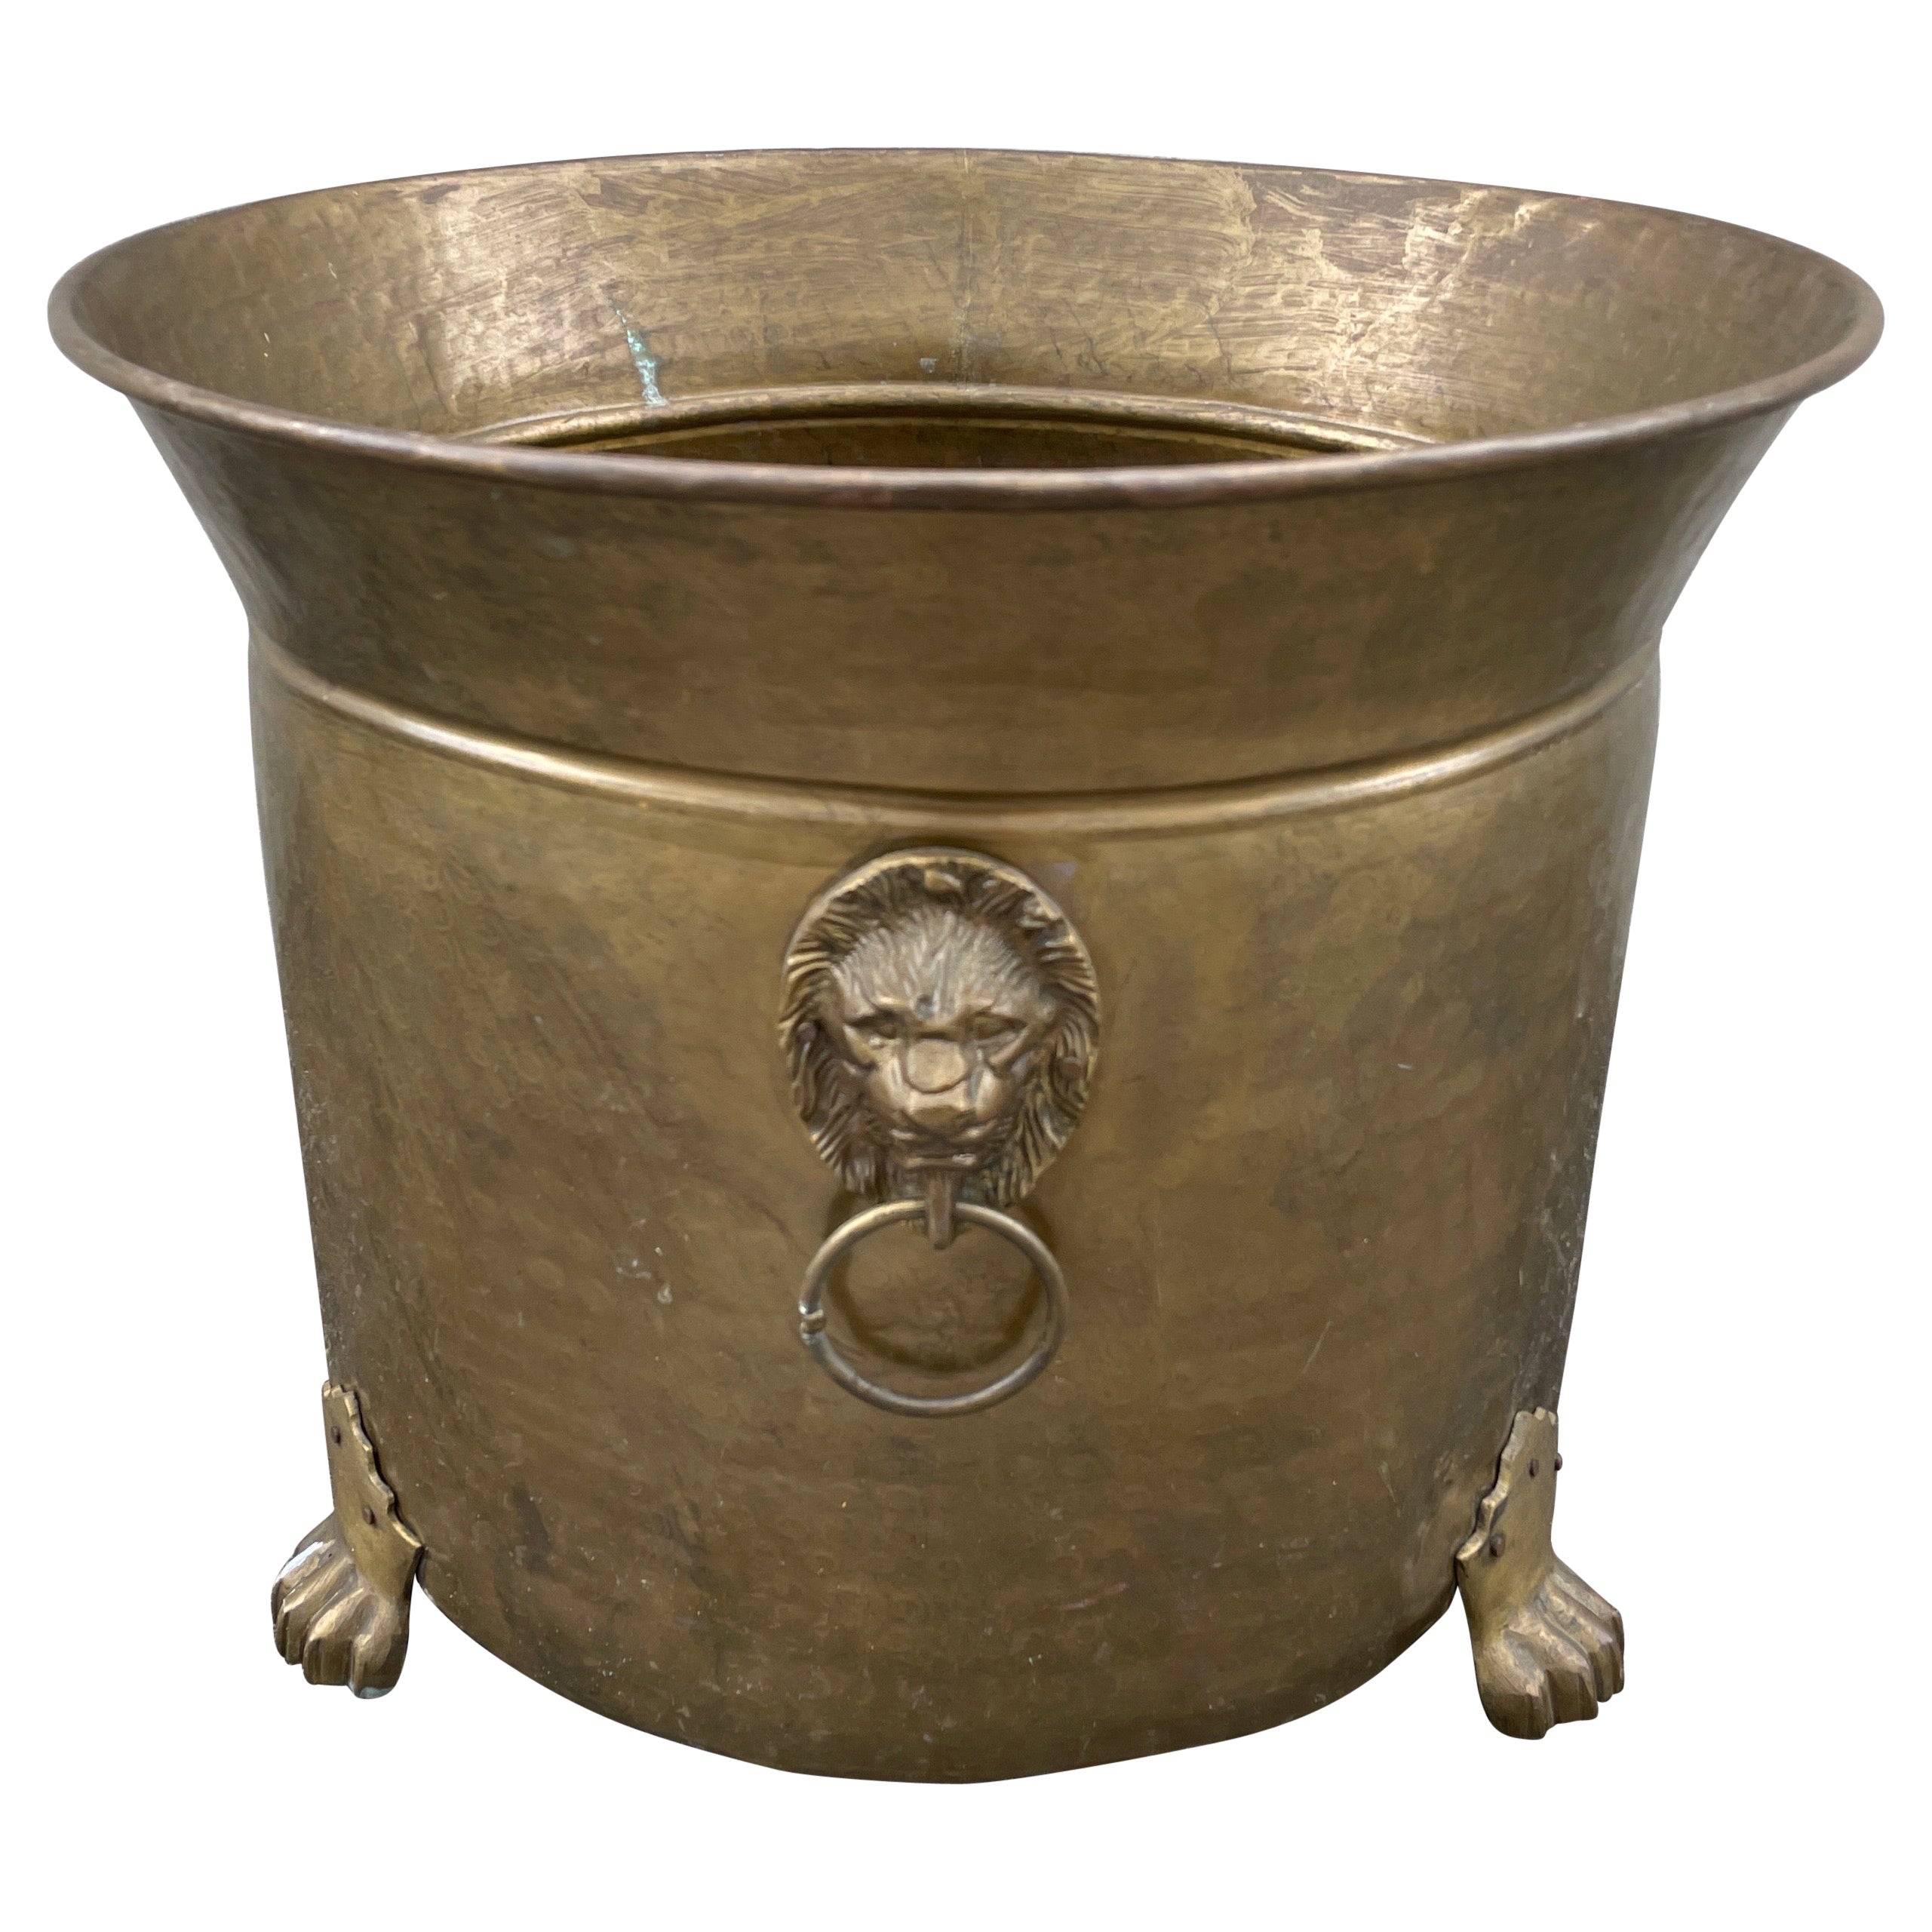 Large Footed Brass Planter with Lion Head Handles